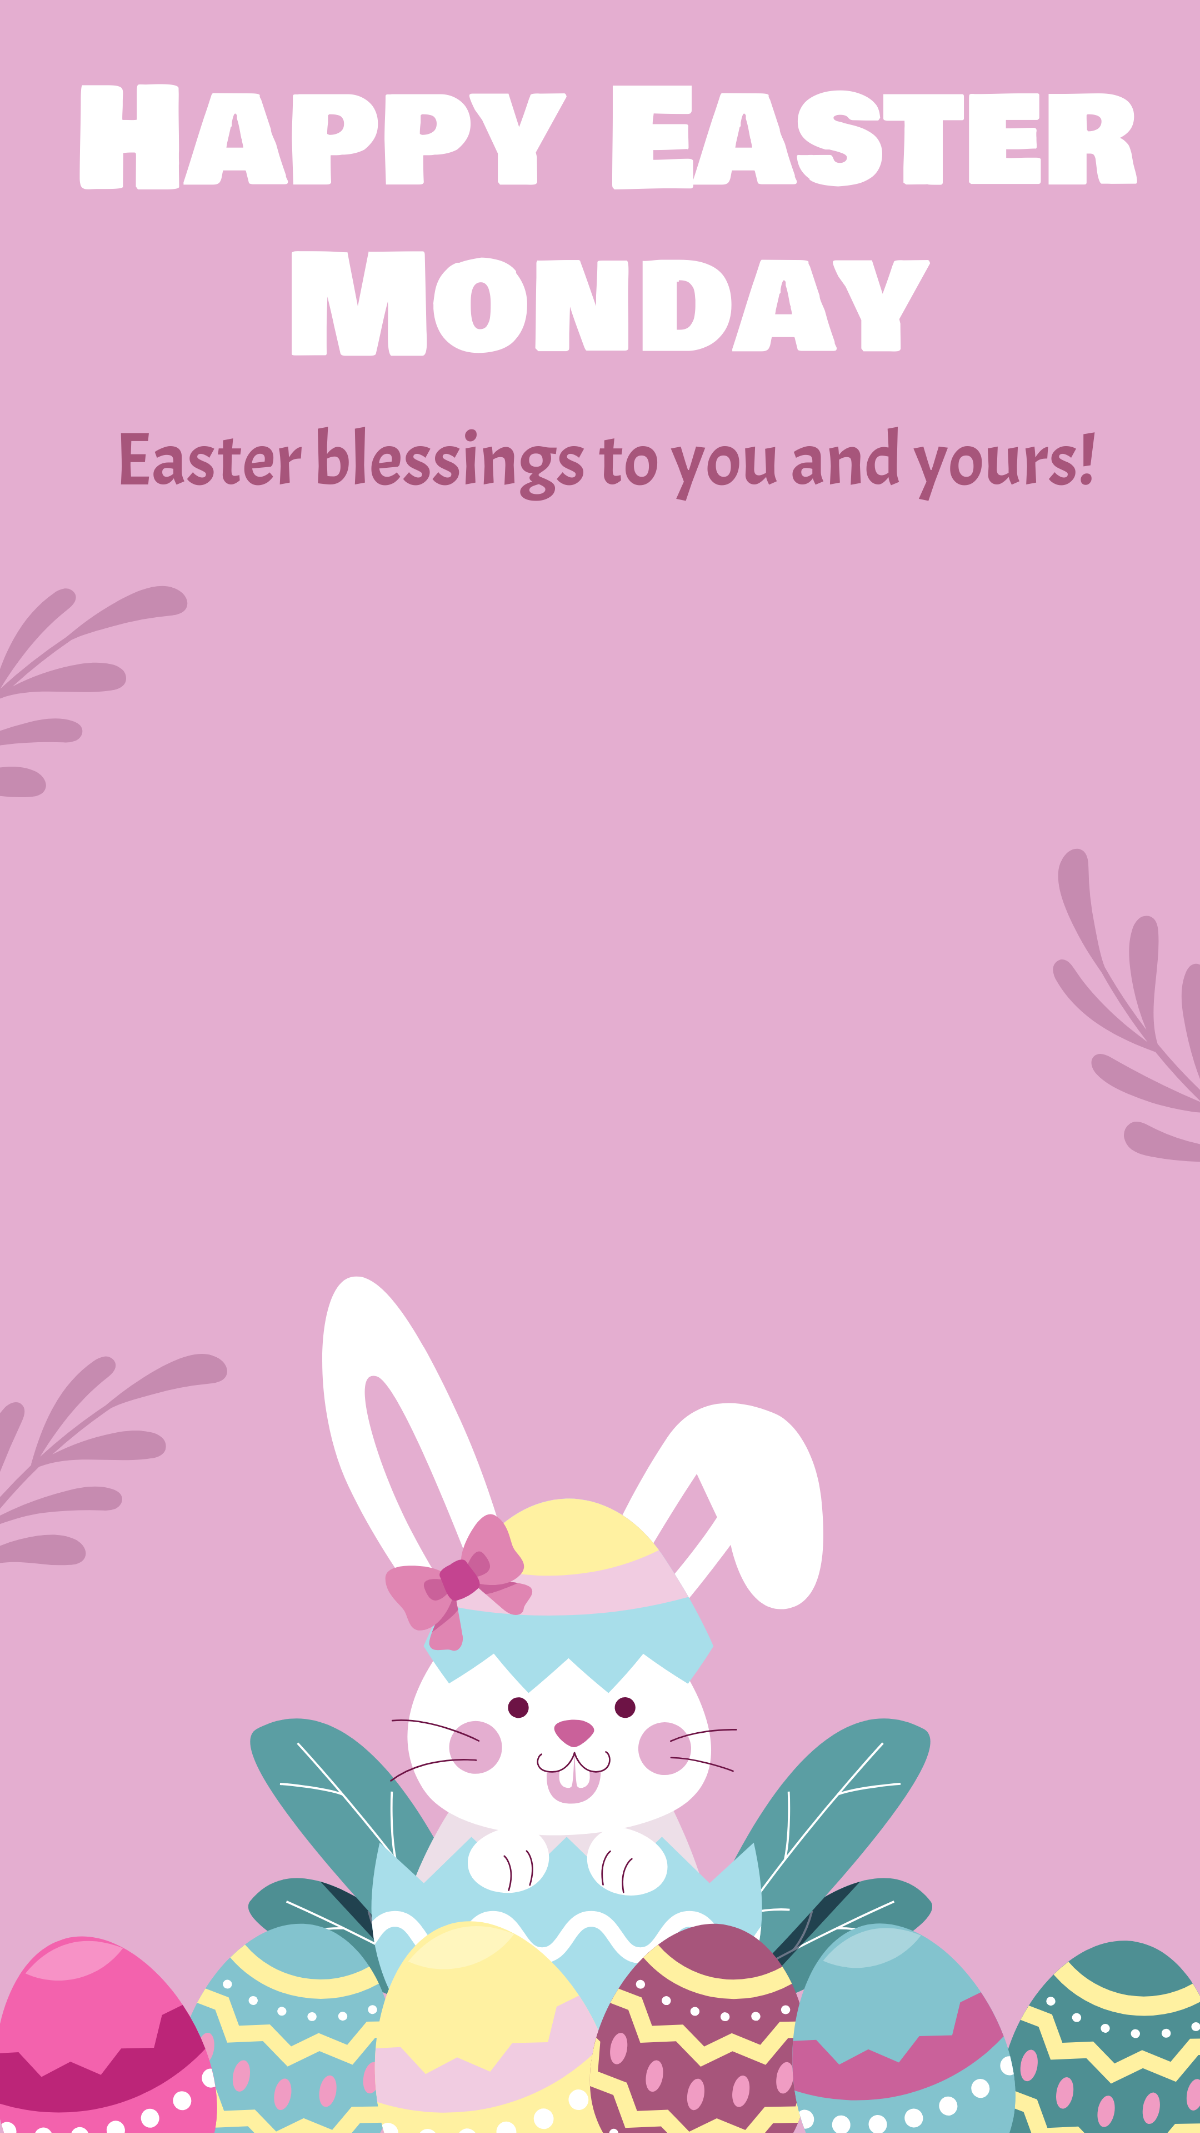 Free Easter Monday Snapchat Geofilter Template